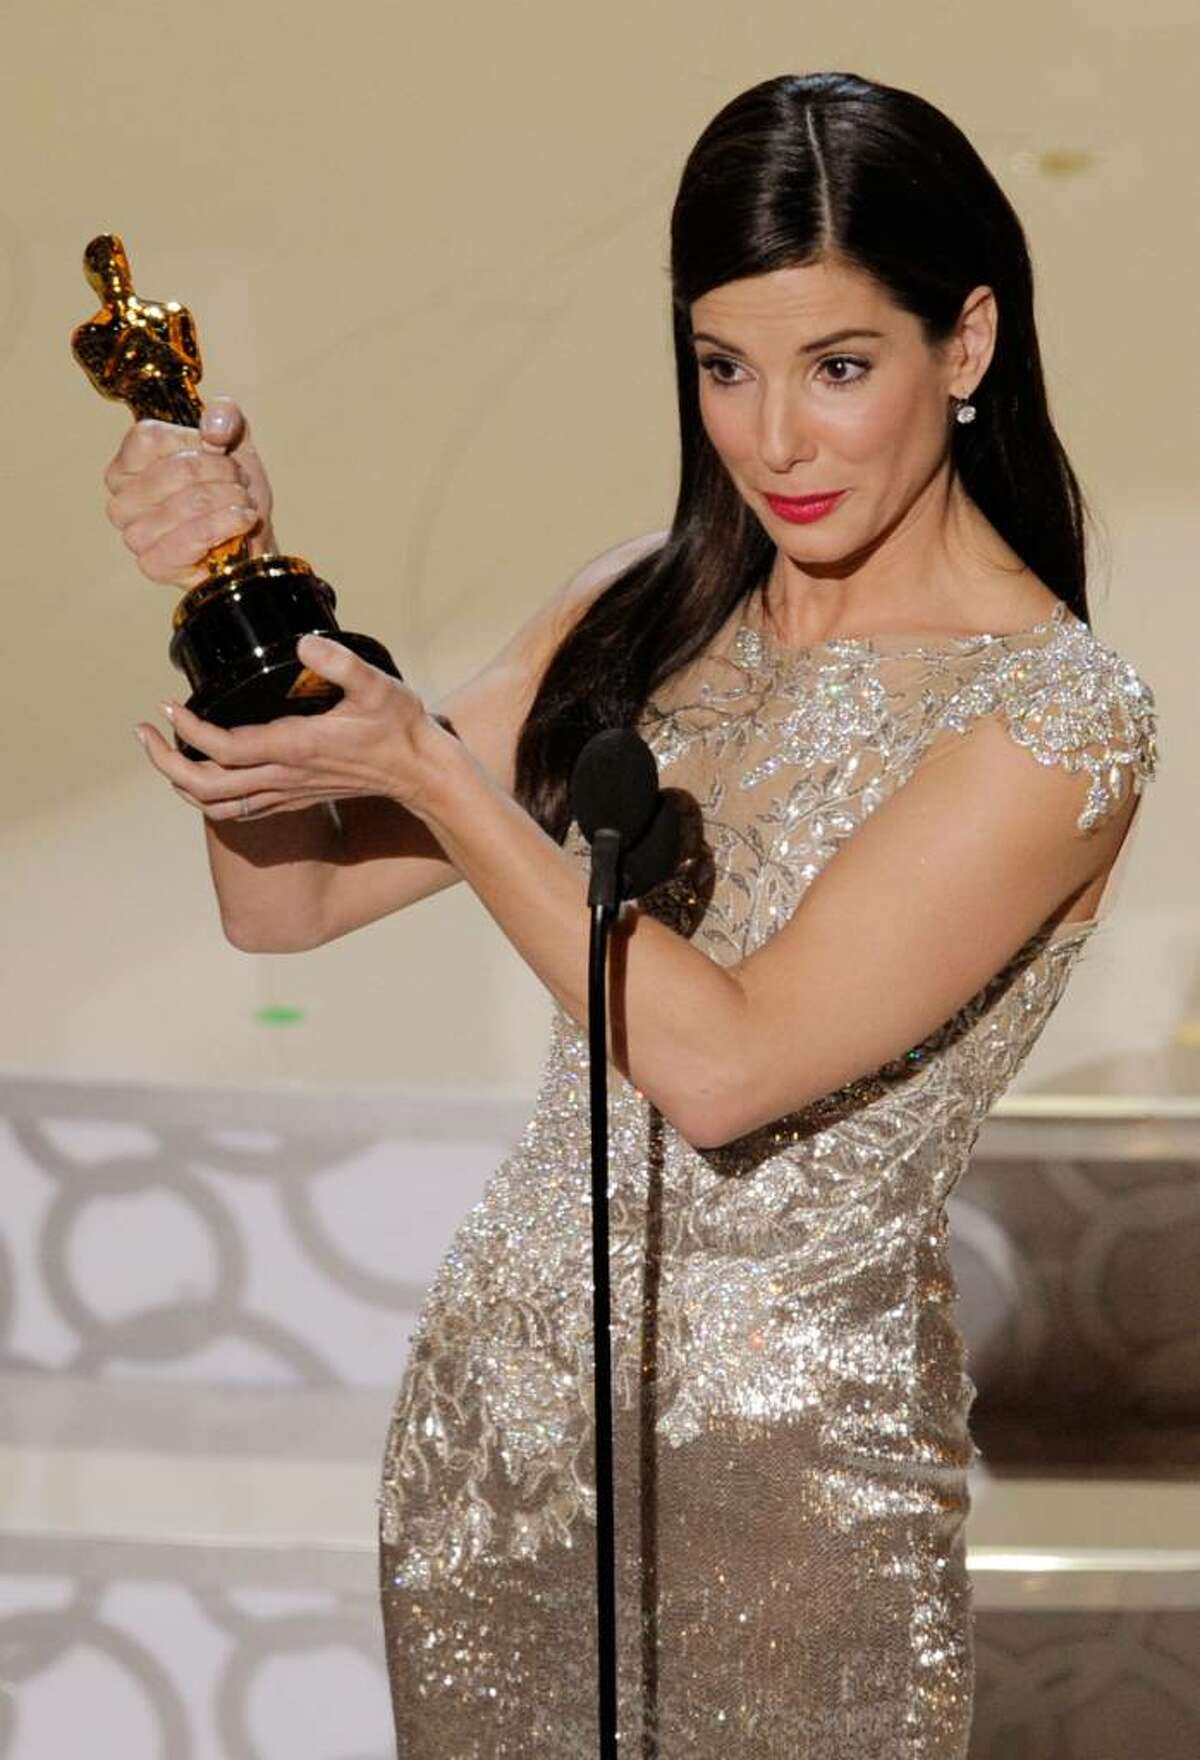 HOLLYWOOD - MARCH 07: Actress Sandra Bullock accepts Best Actress award for "The Blind Side" onstage during the 82nd Annual Academy Awards held at Kodak Theatre on March 7, 2010 in Hollywood, California. (Photo by Kevin Winter/Getty Images) *** Local Caption *** Sandra Bullock